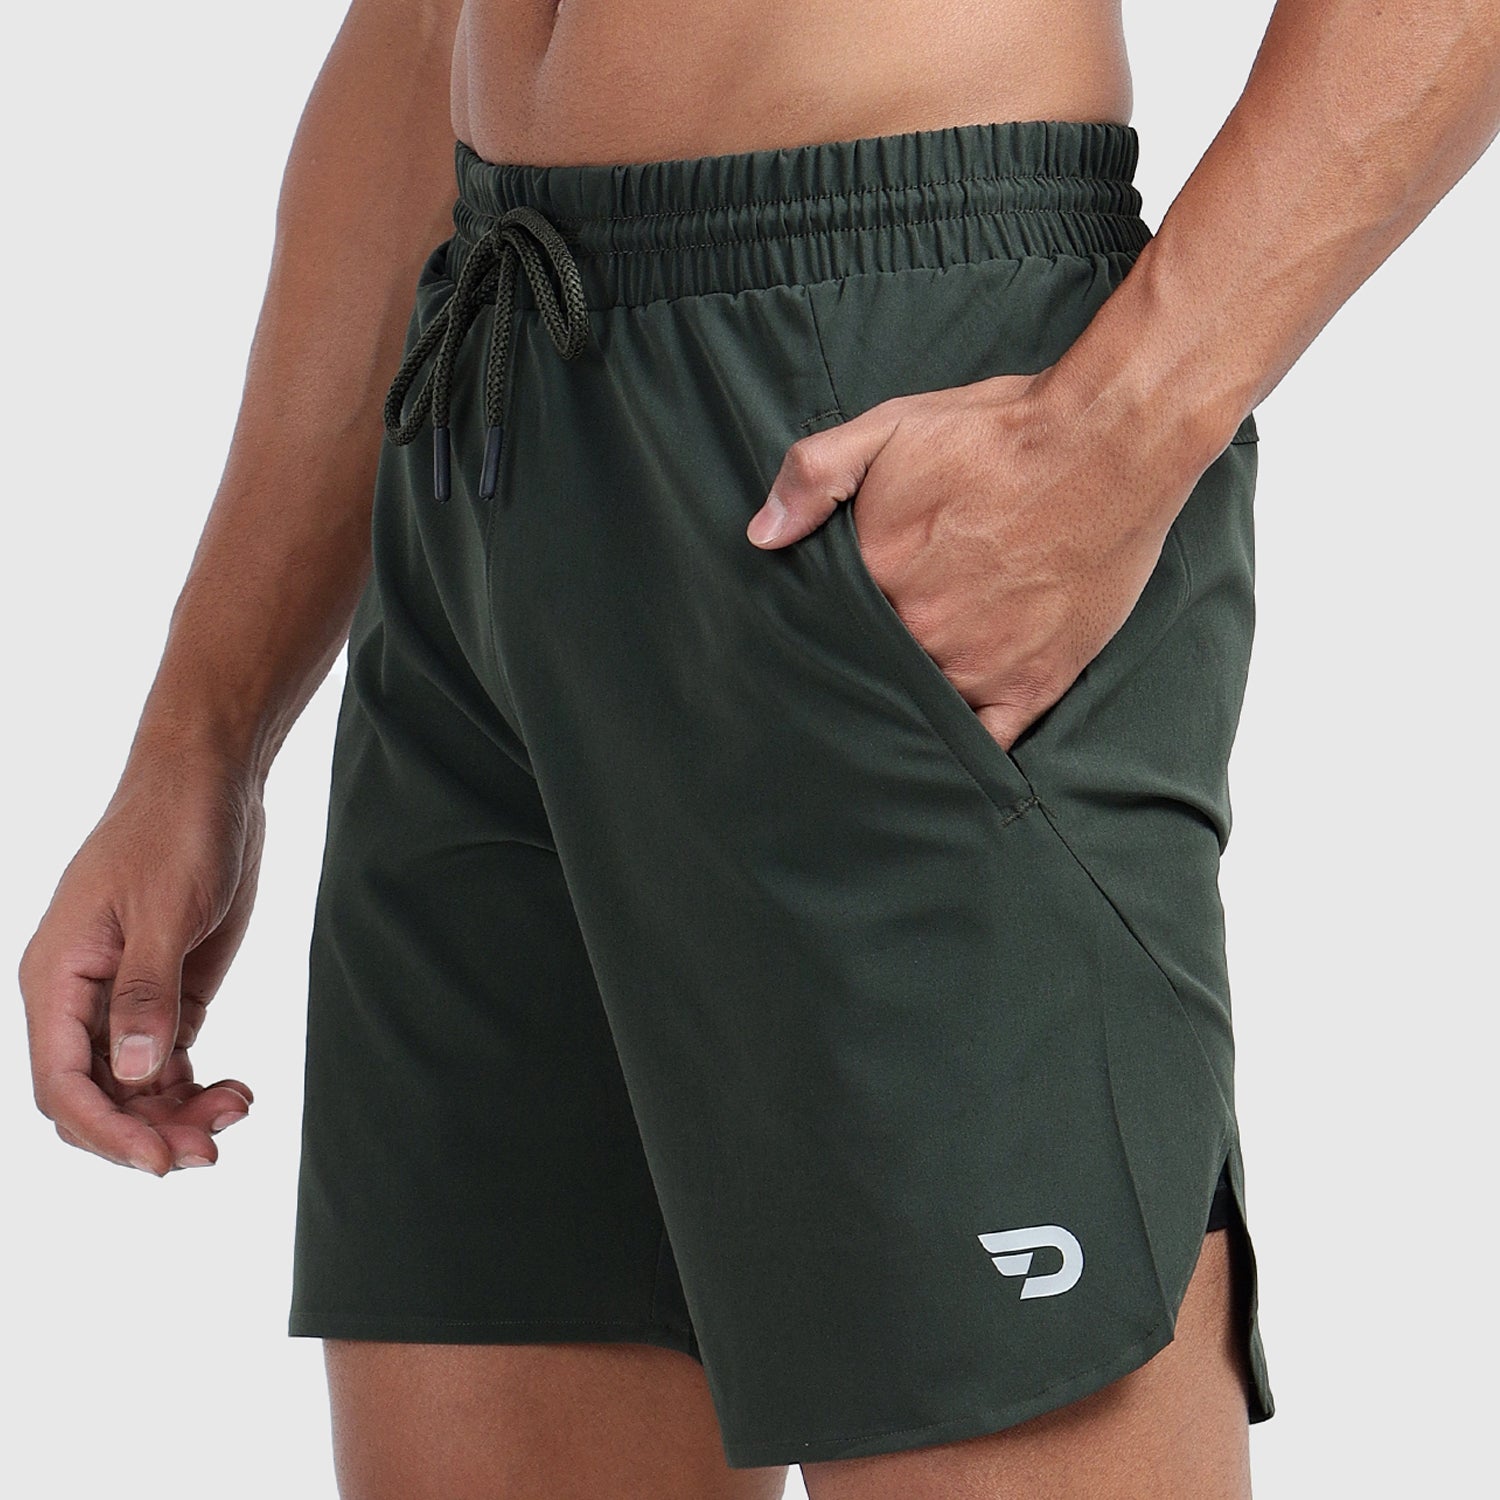 Denmonk's fashionable 2-IN-1 SHORTS core olive shorts for men will boost your level of gym fitness.